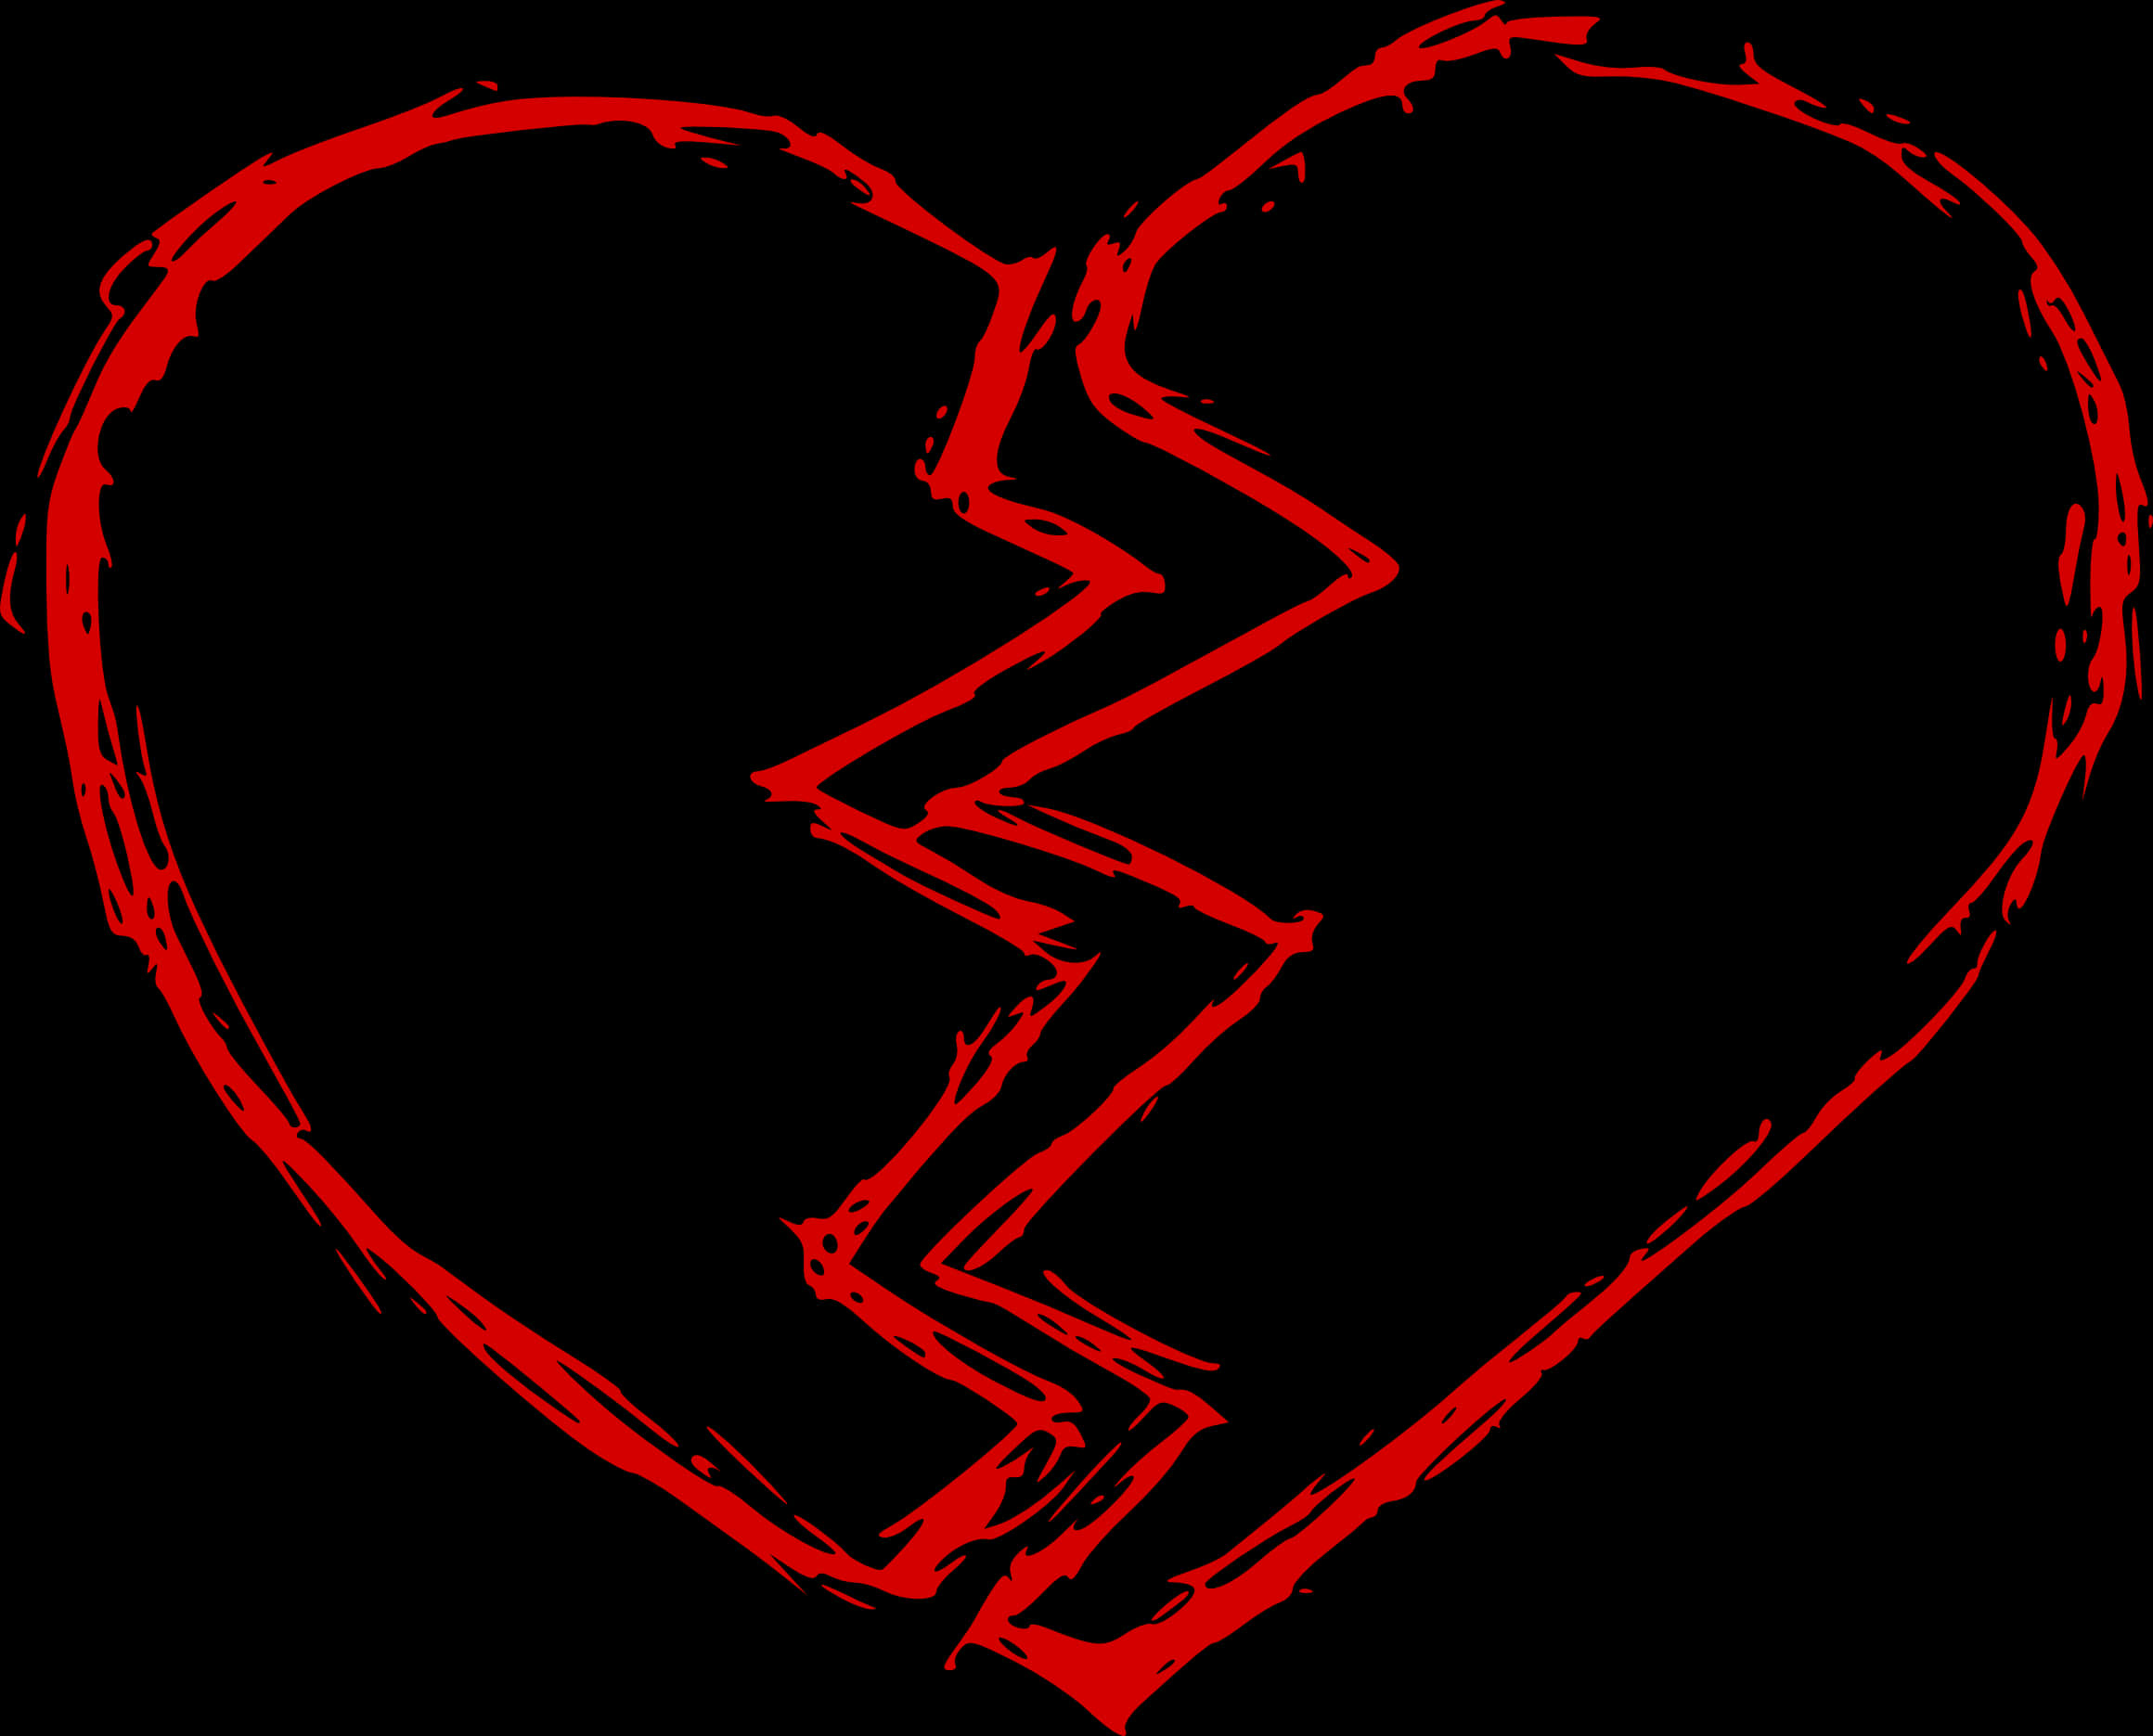 A Broken Heart Drawn In Red On A Black Background PNG